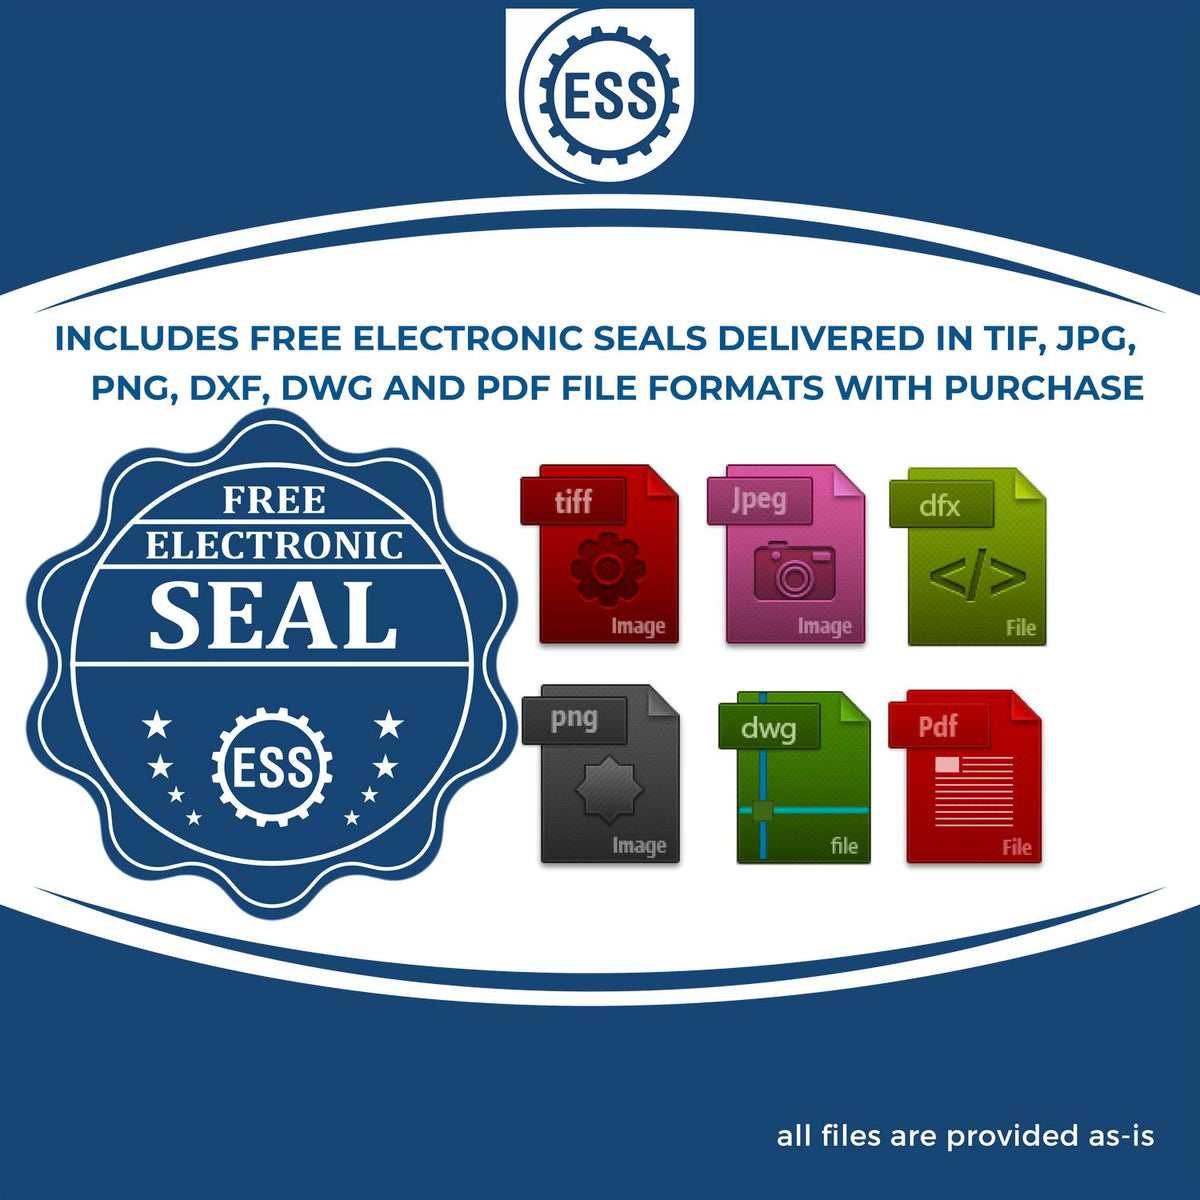 An infographic for the free electronic seal for the Slim Pre-Inked Missouri Professional Engineer Seal Stamp illustrating the different file type icons such as DXF, DWG, TIF, JPG and PNG.